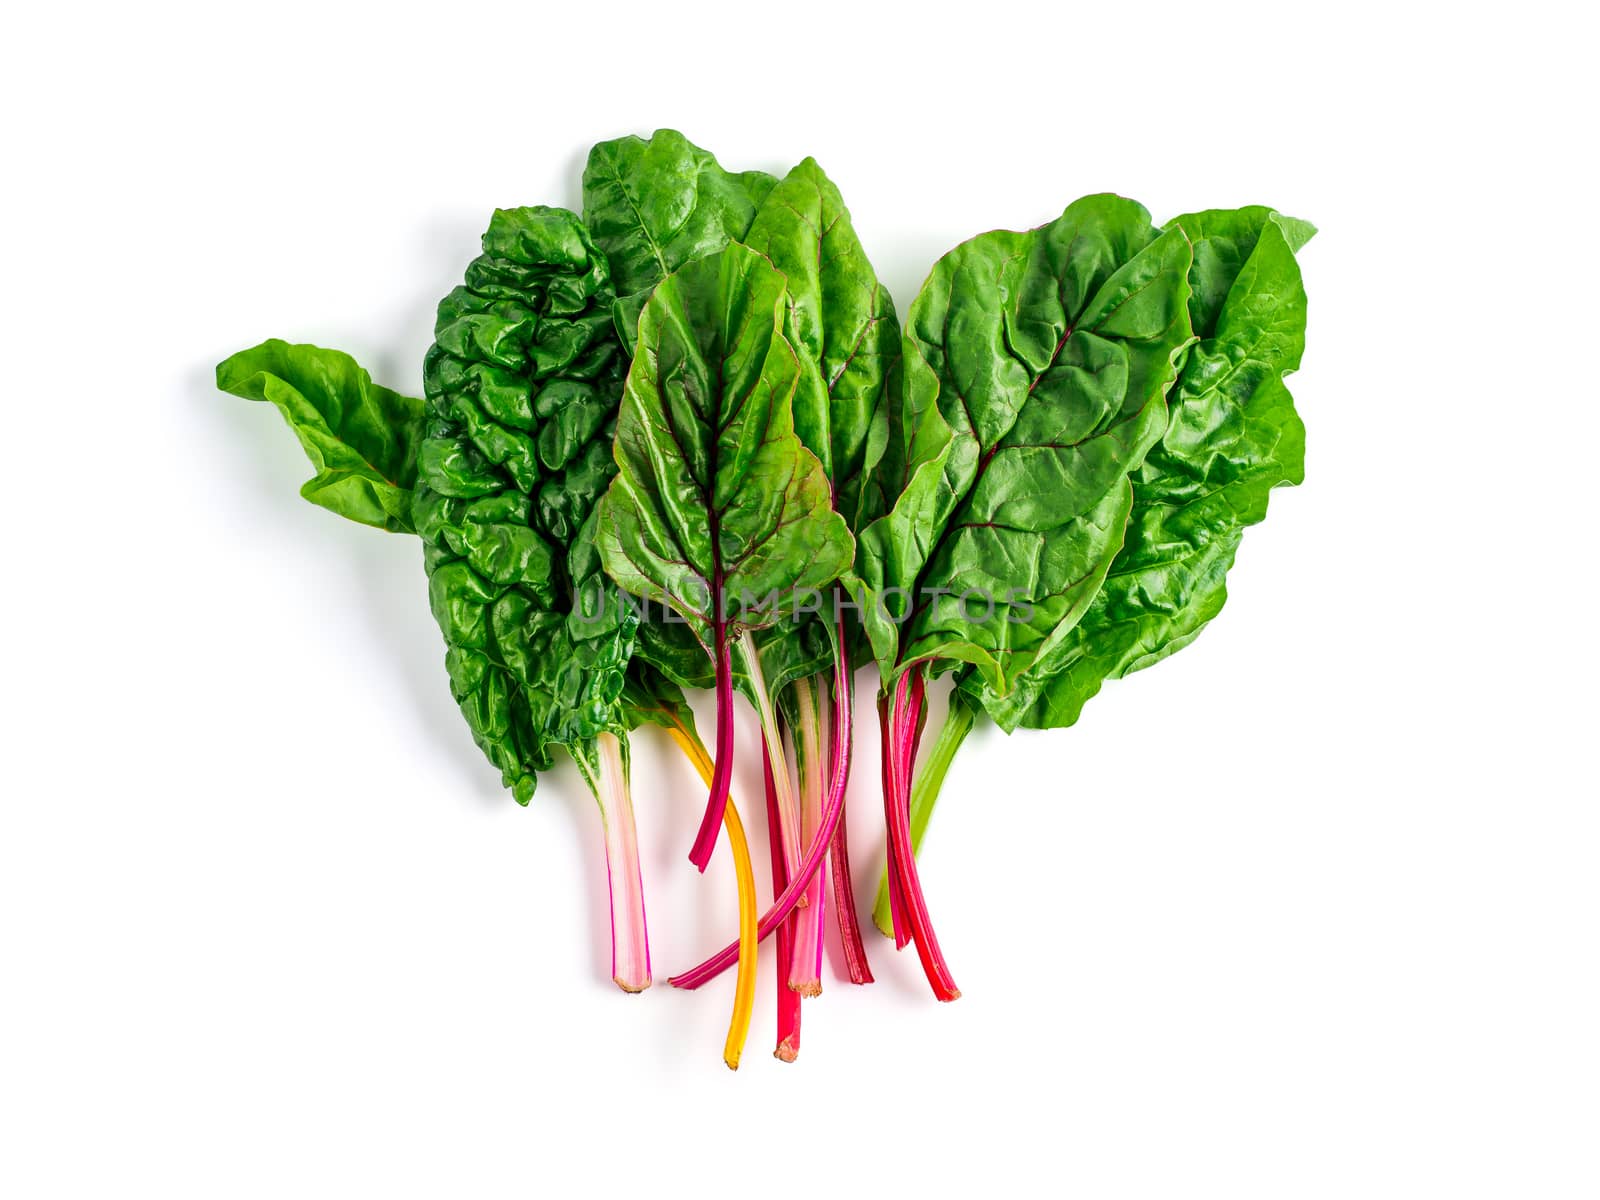 Bunch of swiss chard leafves isolated on white background. Fresh swiss rainbow chard with yellow, red and green colors, top view or flat lay